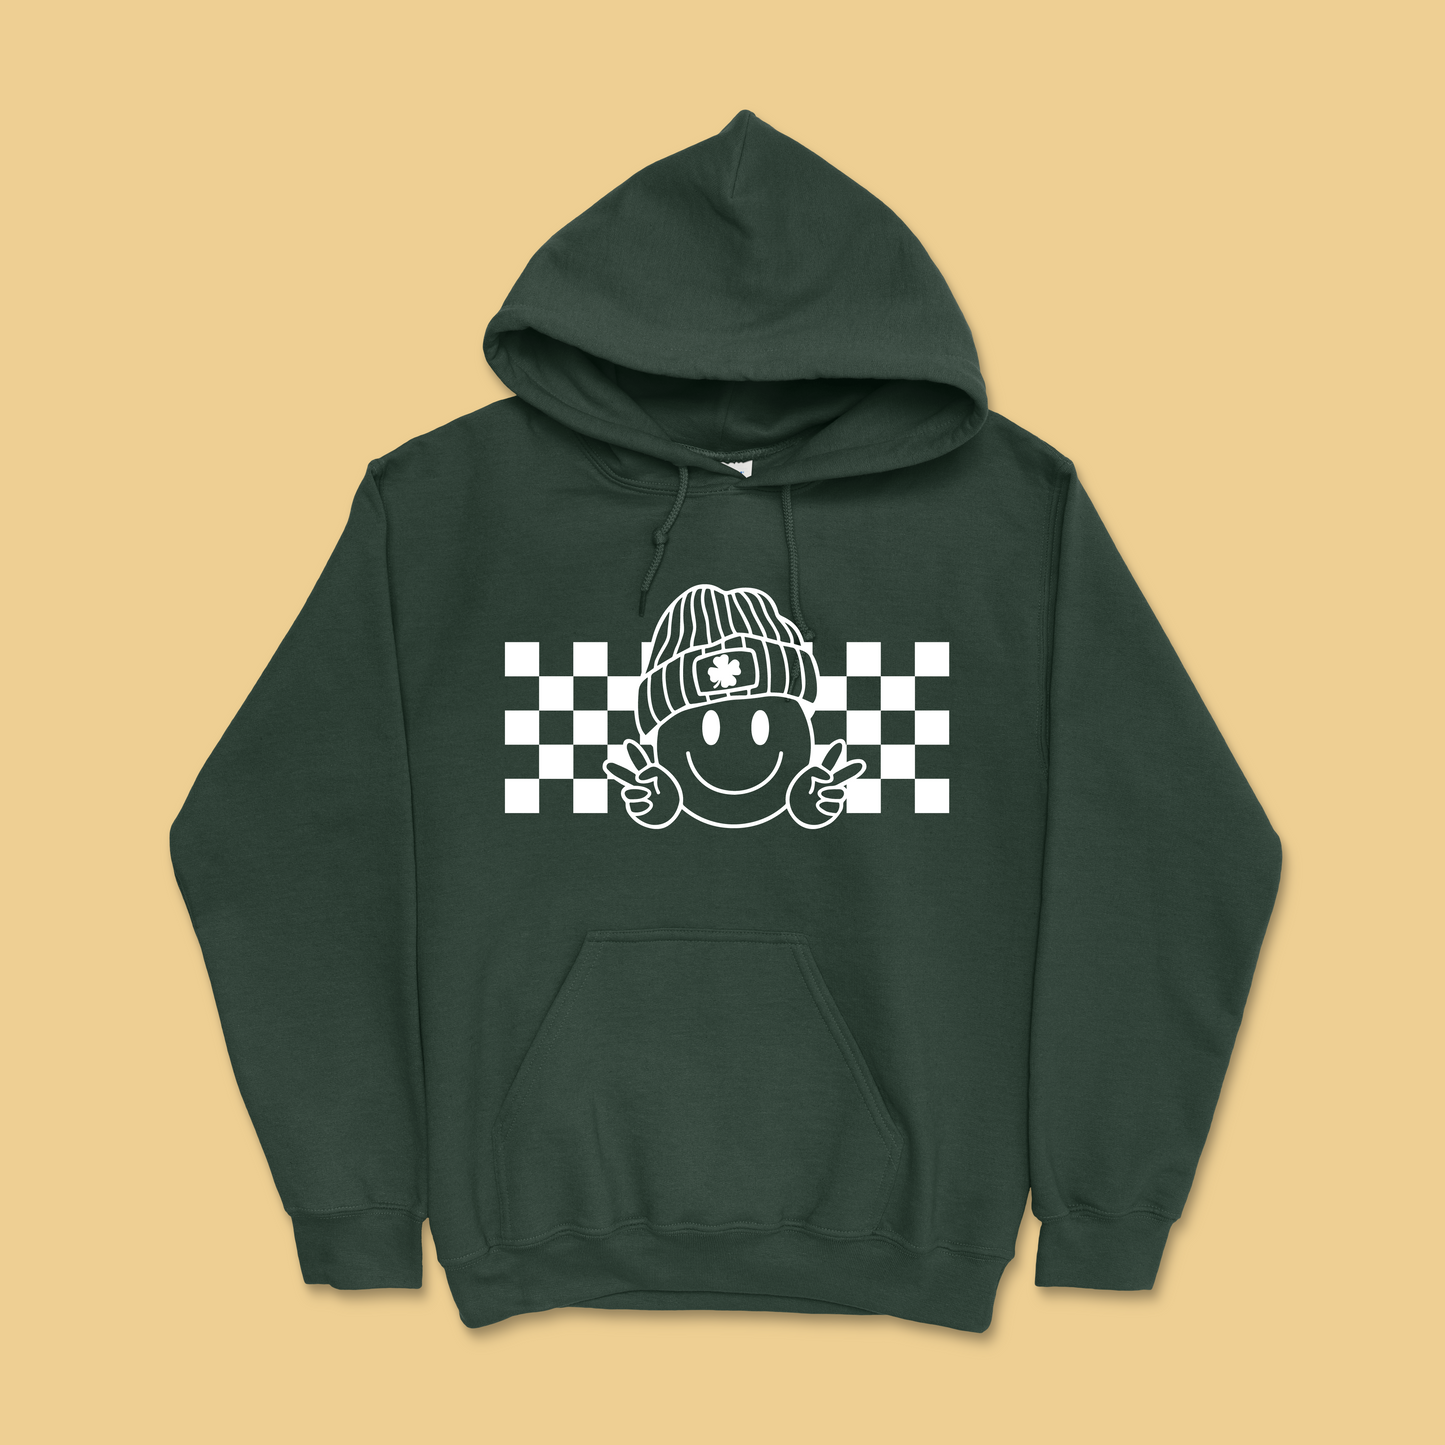 CHECKERED BEANIE YOUTH SWEATER <br> More colors available